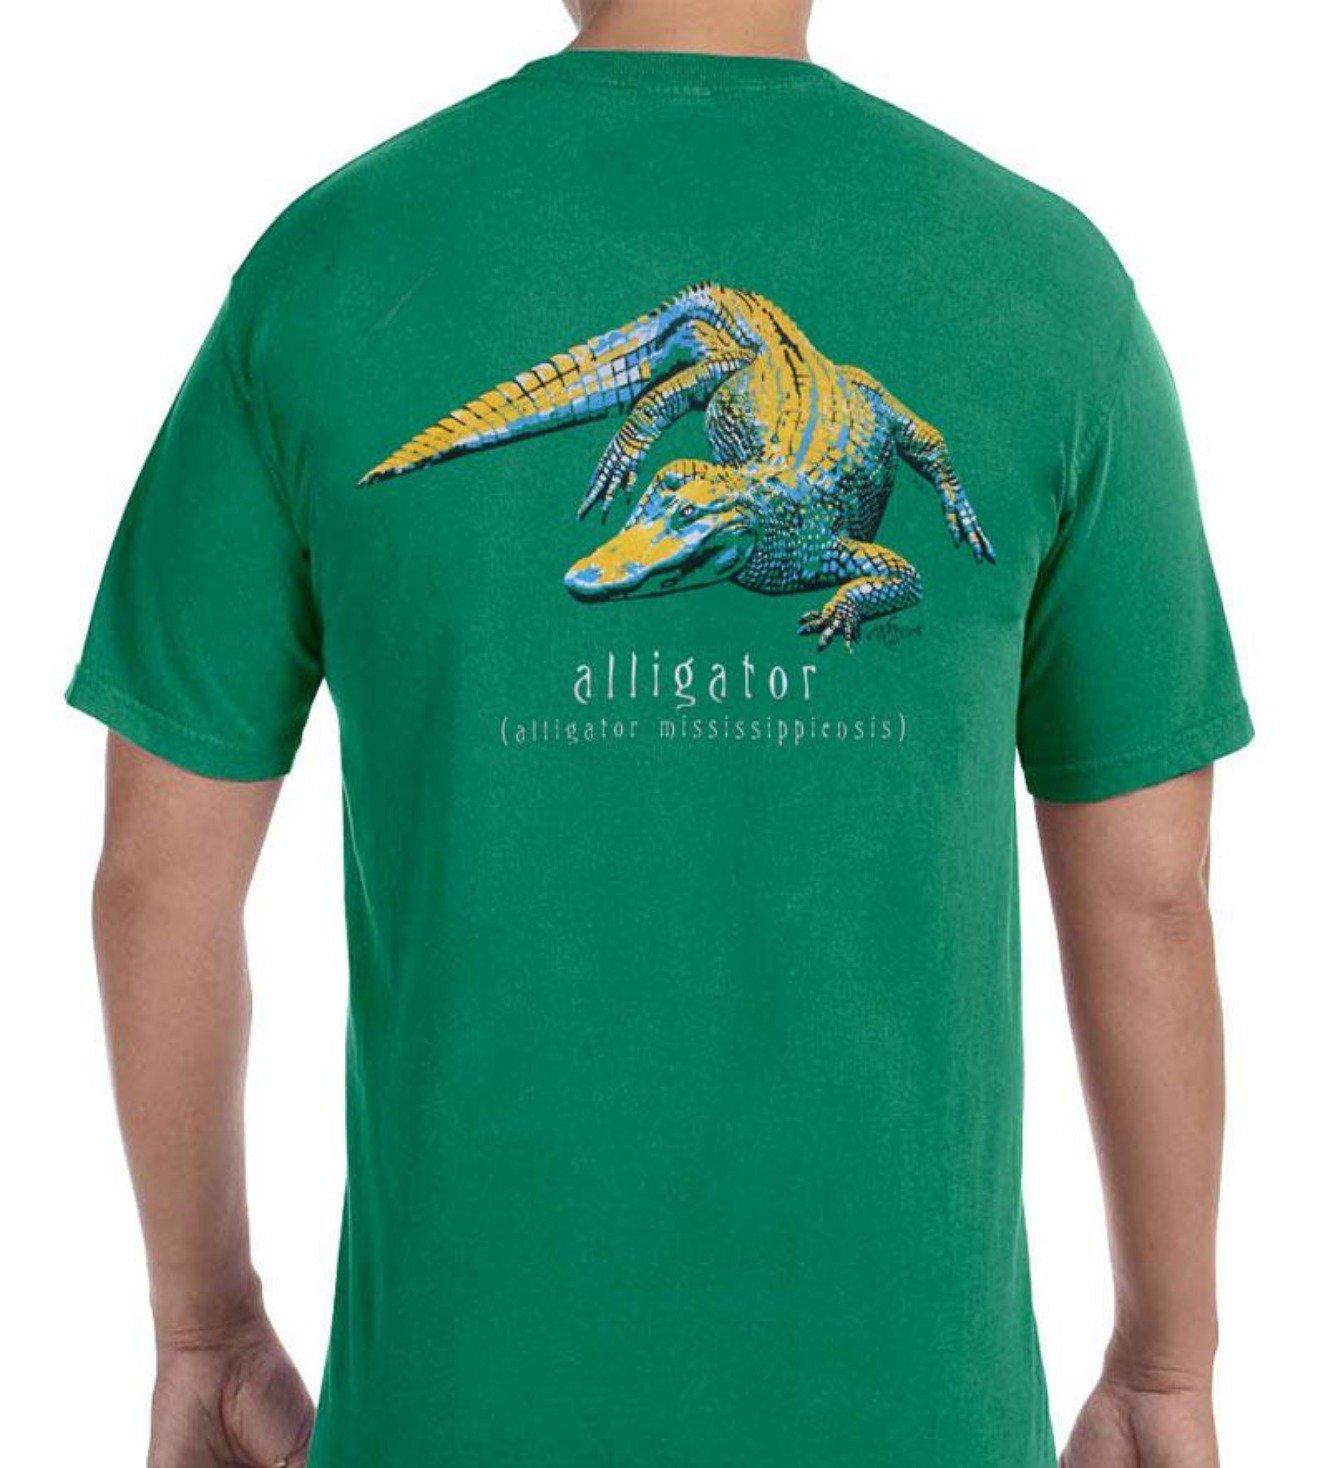 Alligator - Short Sleeve T-Shirt by Phins Apparel